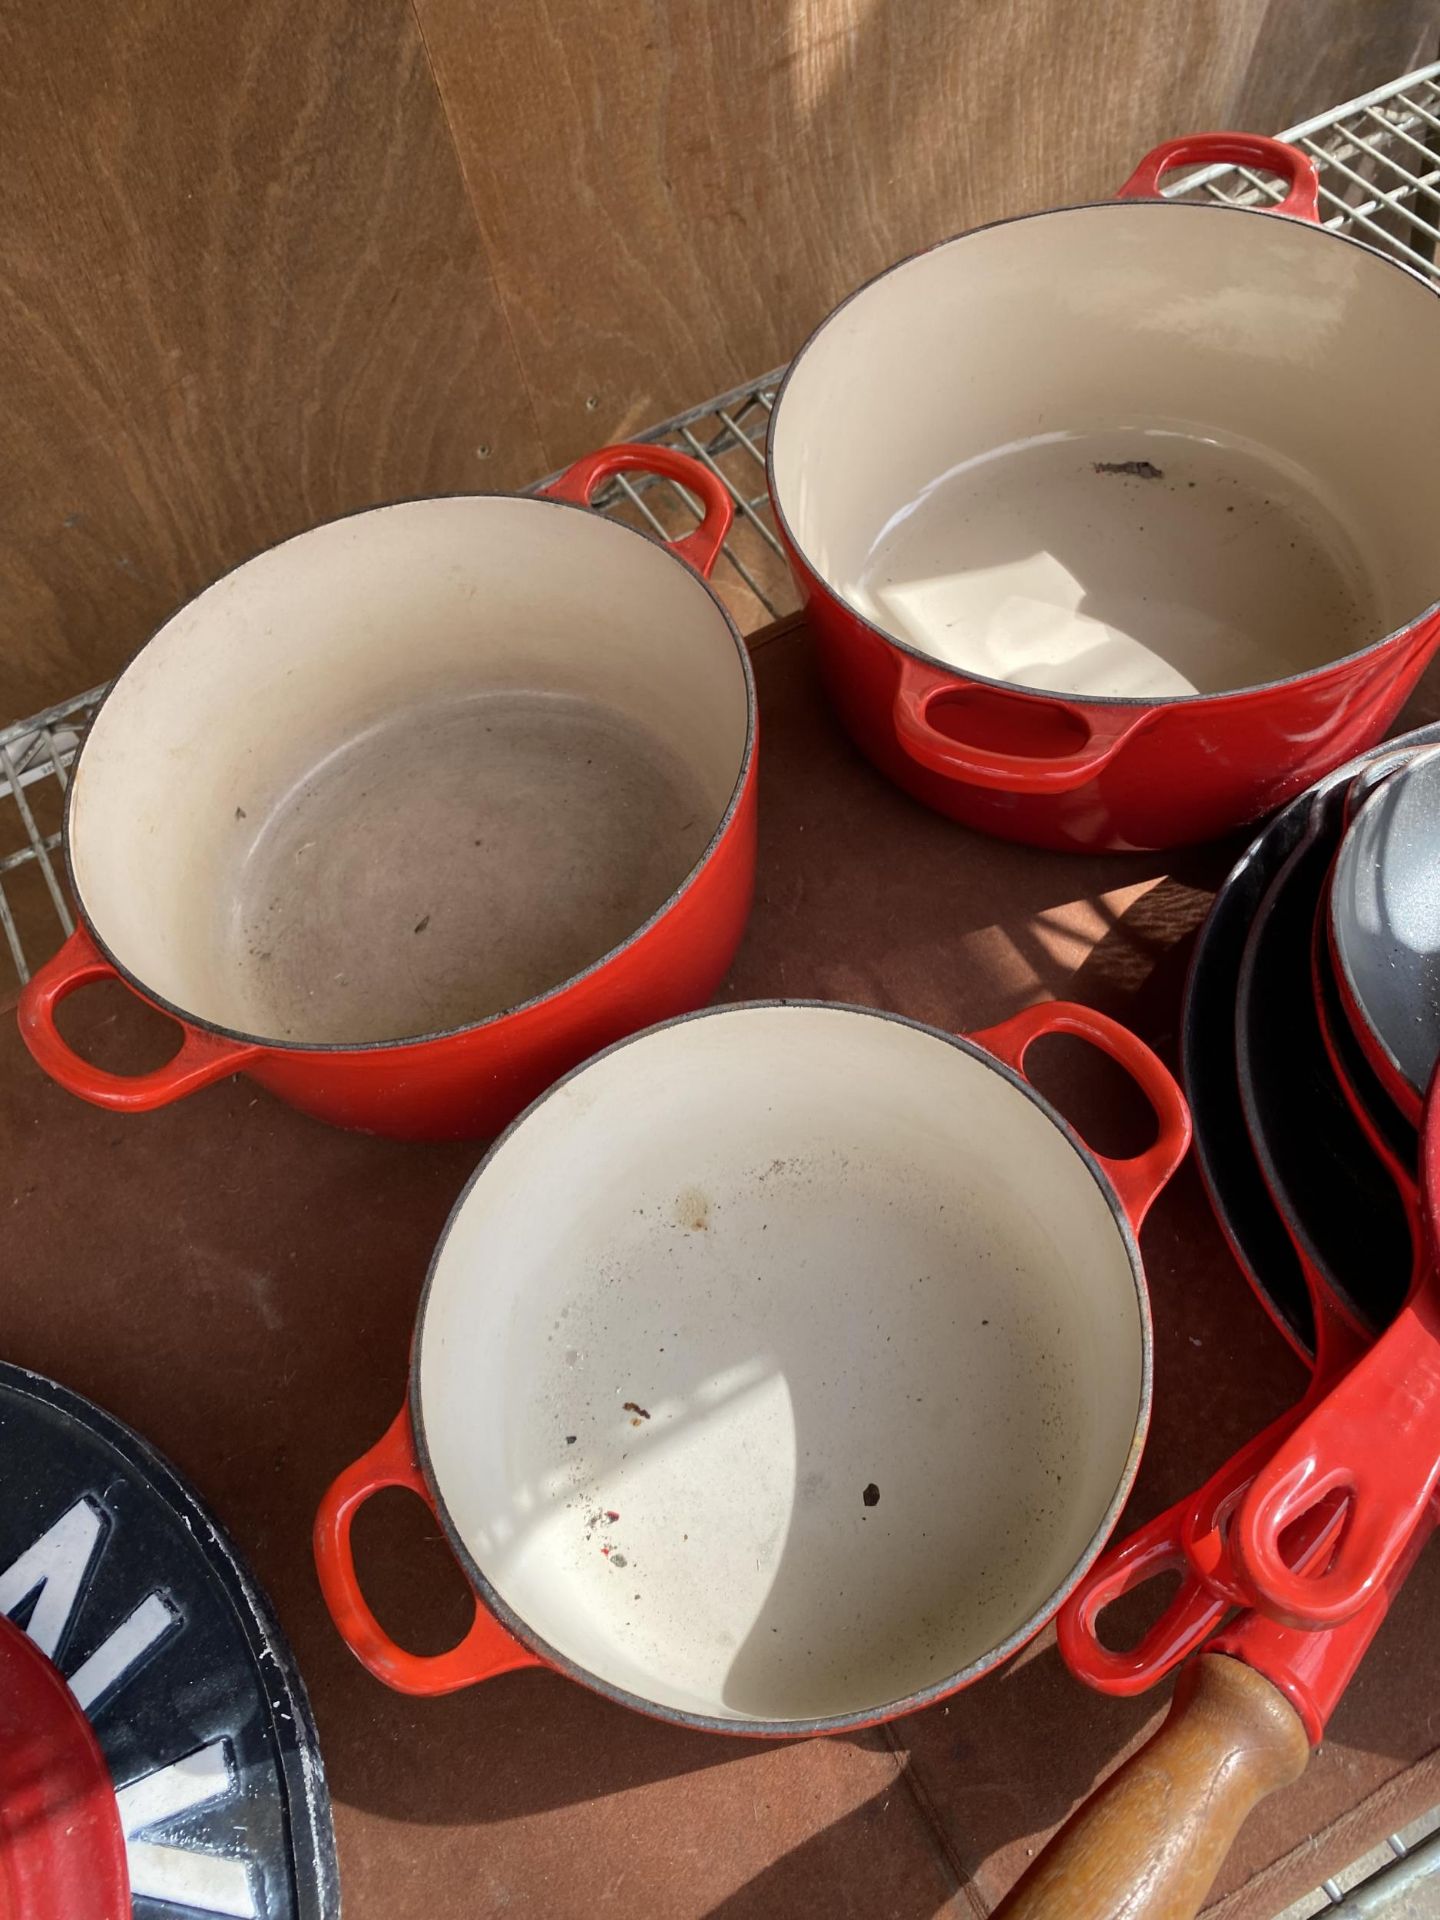 A RED LE CREUSET PAN SET WITH THREE CASAROLE DISHES, FOUR FRYING PANS AND A KETTLE - Image 3 of 5